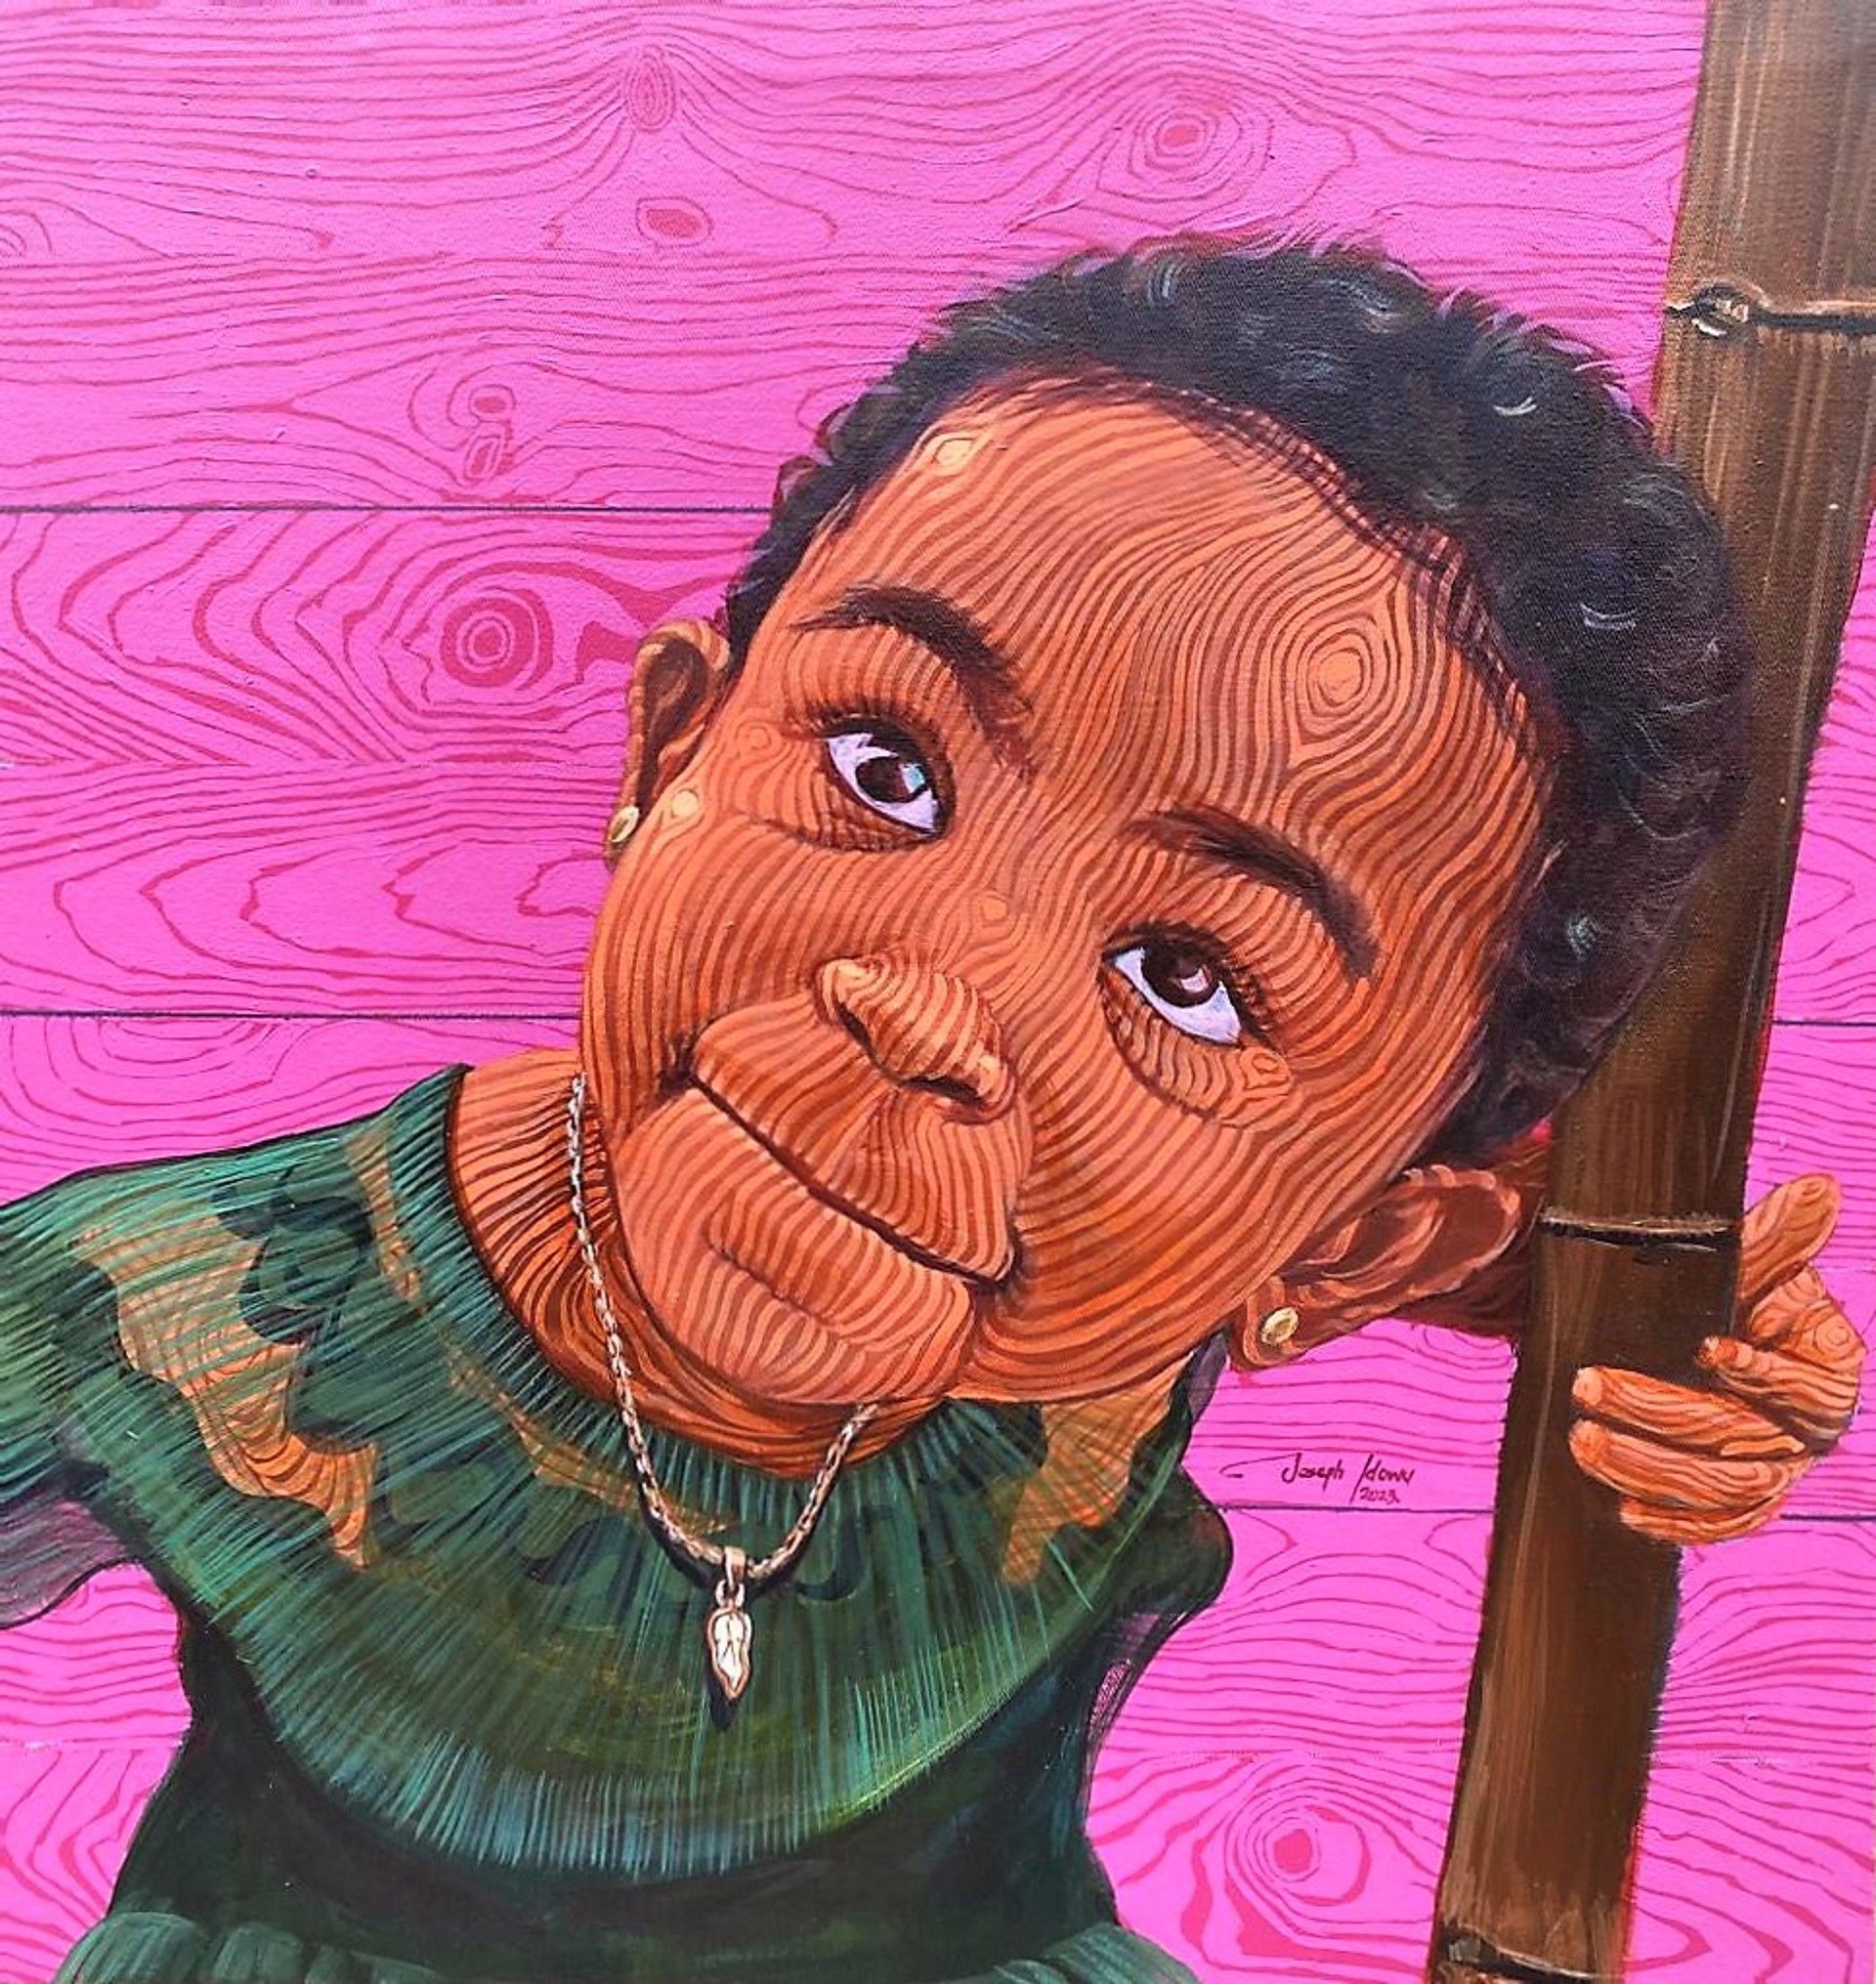 The Girl and the Bamboo 2 by Joseph Idowu